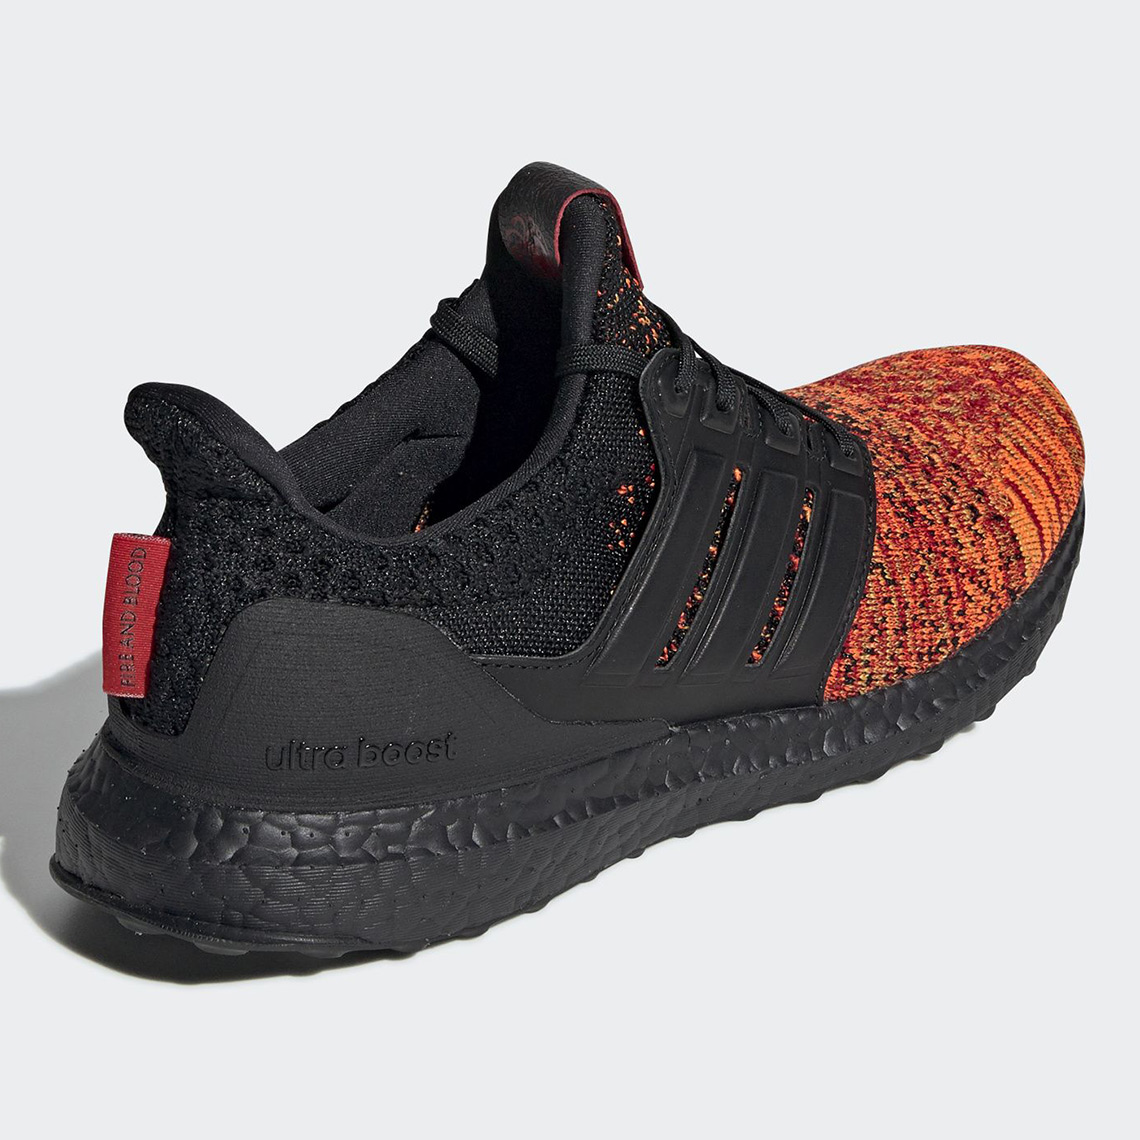 Game Of Thrones adidas Shoes - Full 